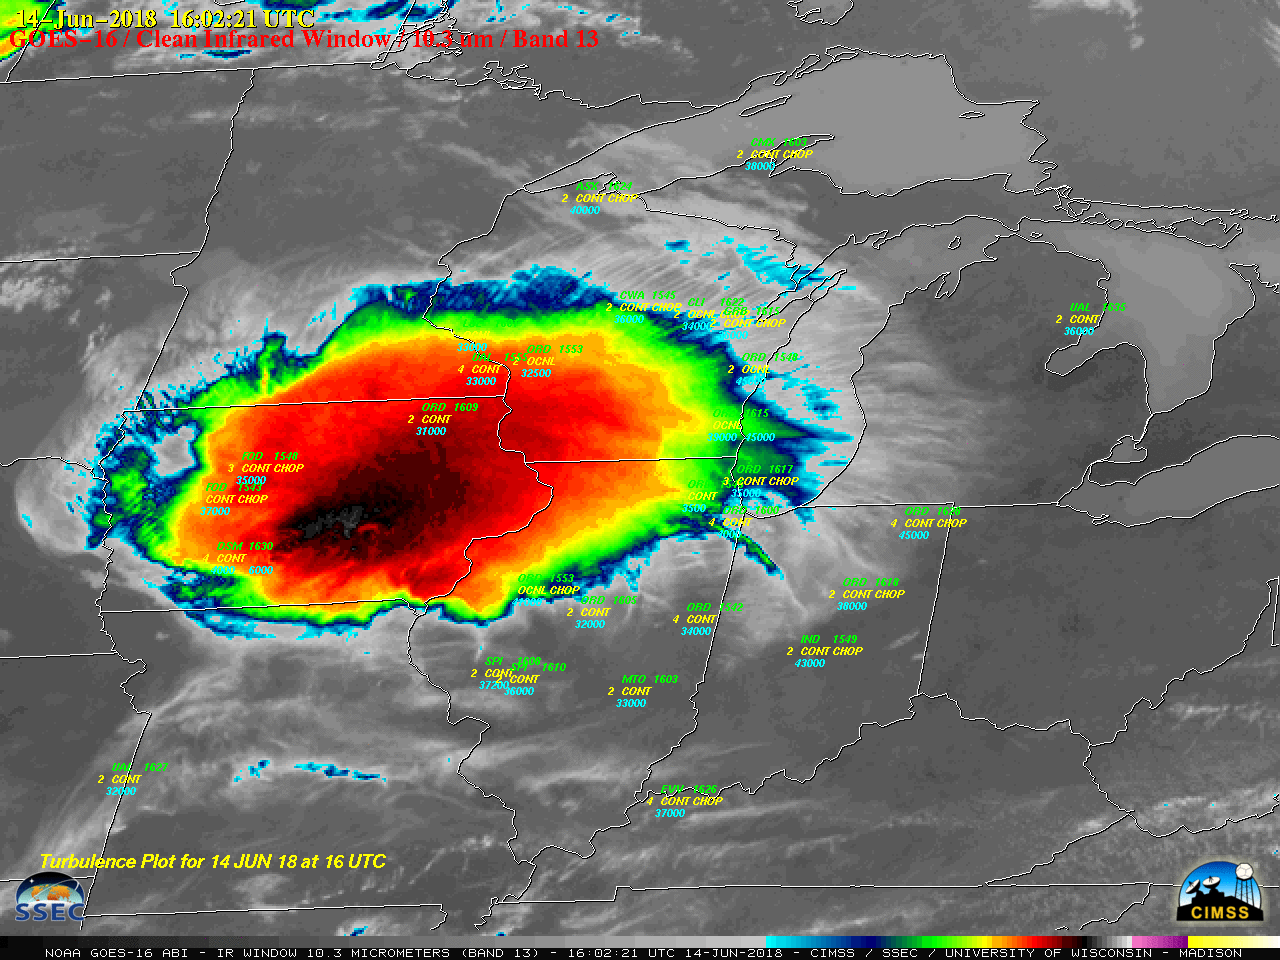 GOES-16 "Clean" Infrared Window (10.3 µm) images, with hourly plots of turbulence [click to play MP4 animation]